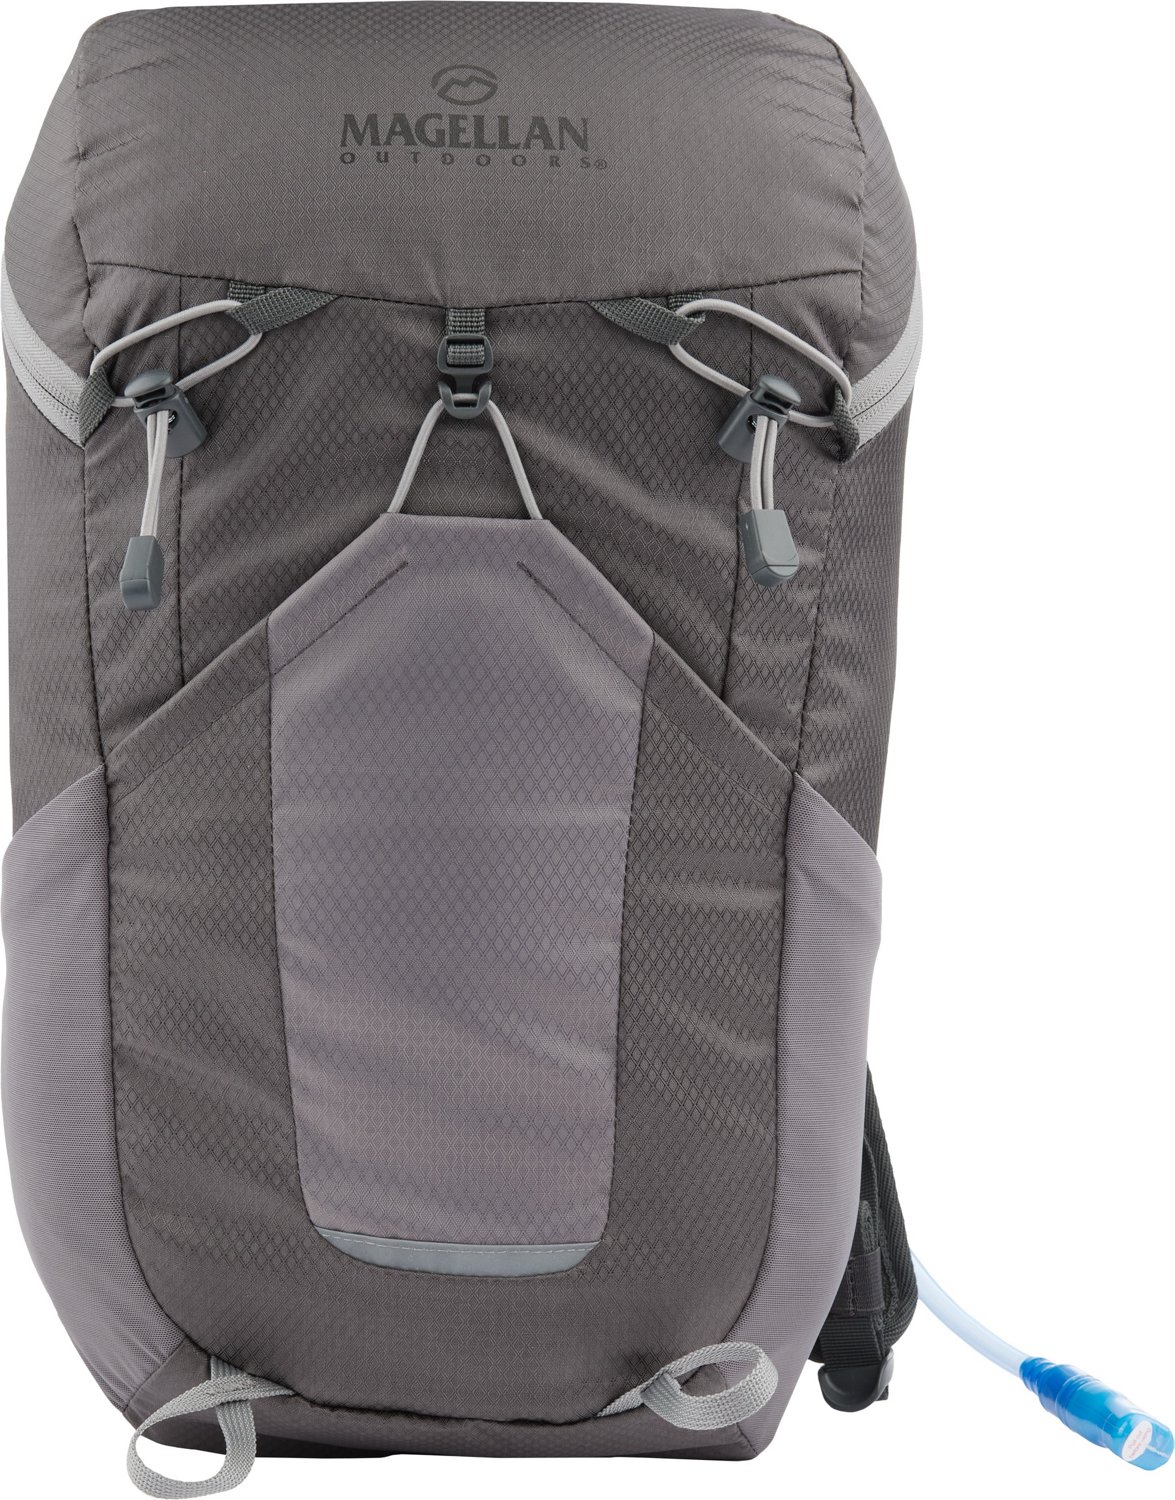 Magellan Outdoors Explore 18L Hiking Hydration Pack                                                                              - view number 1 selected